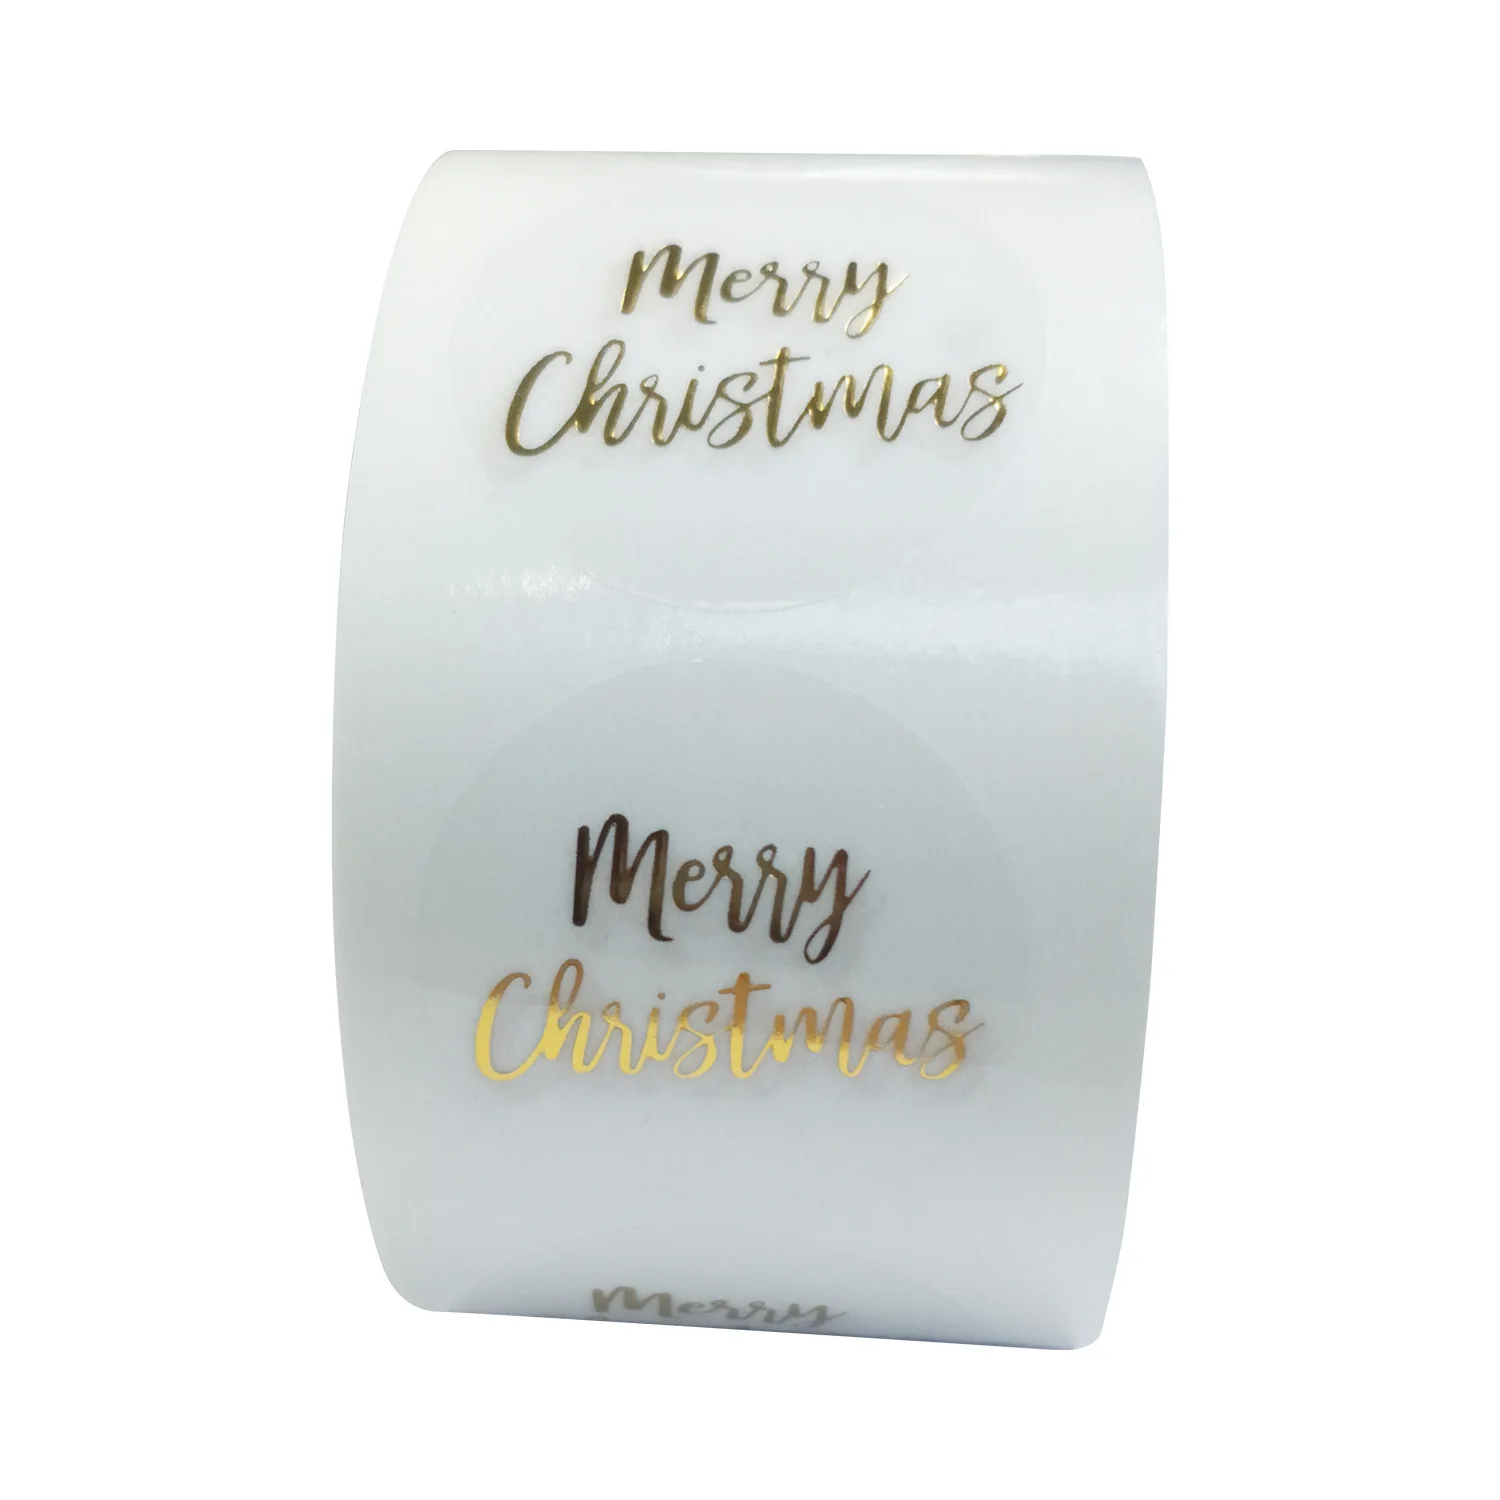 

Merry Christmas Stickers Labels Roll Round Christmas Tags Adhesive Xmas Decorative Envelope Seals Stickers Cards Gift Box Decors